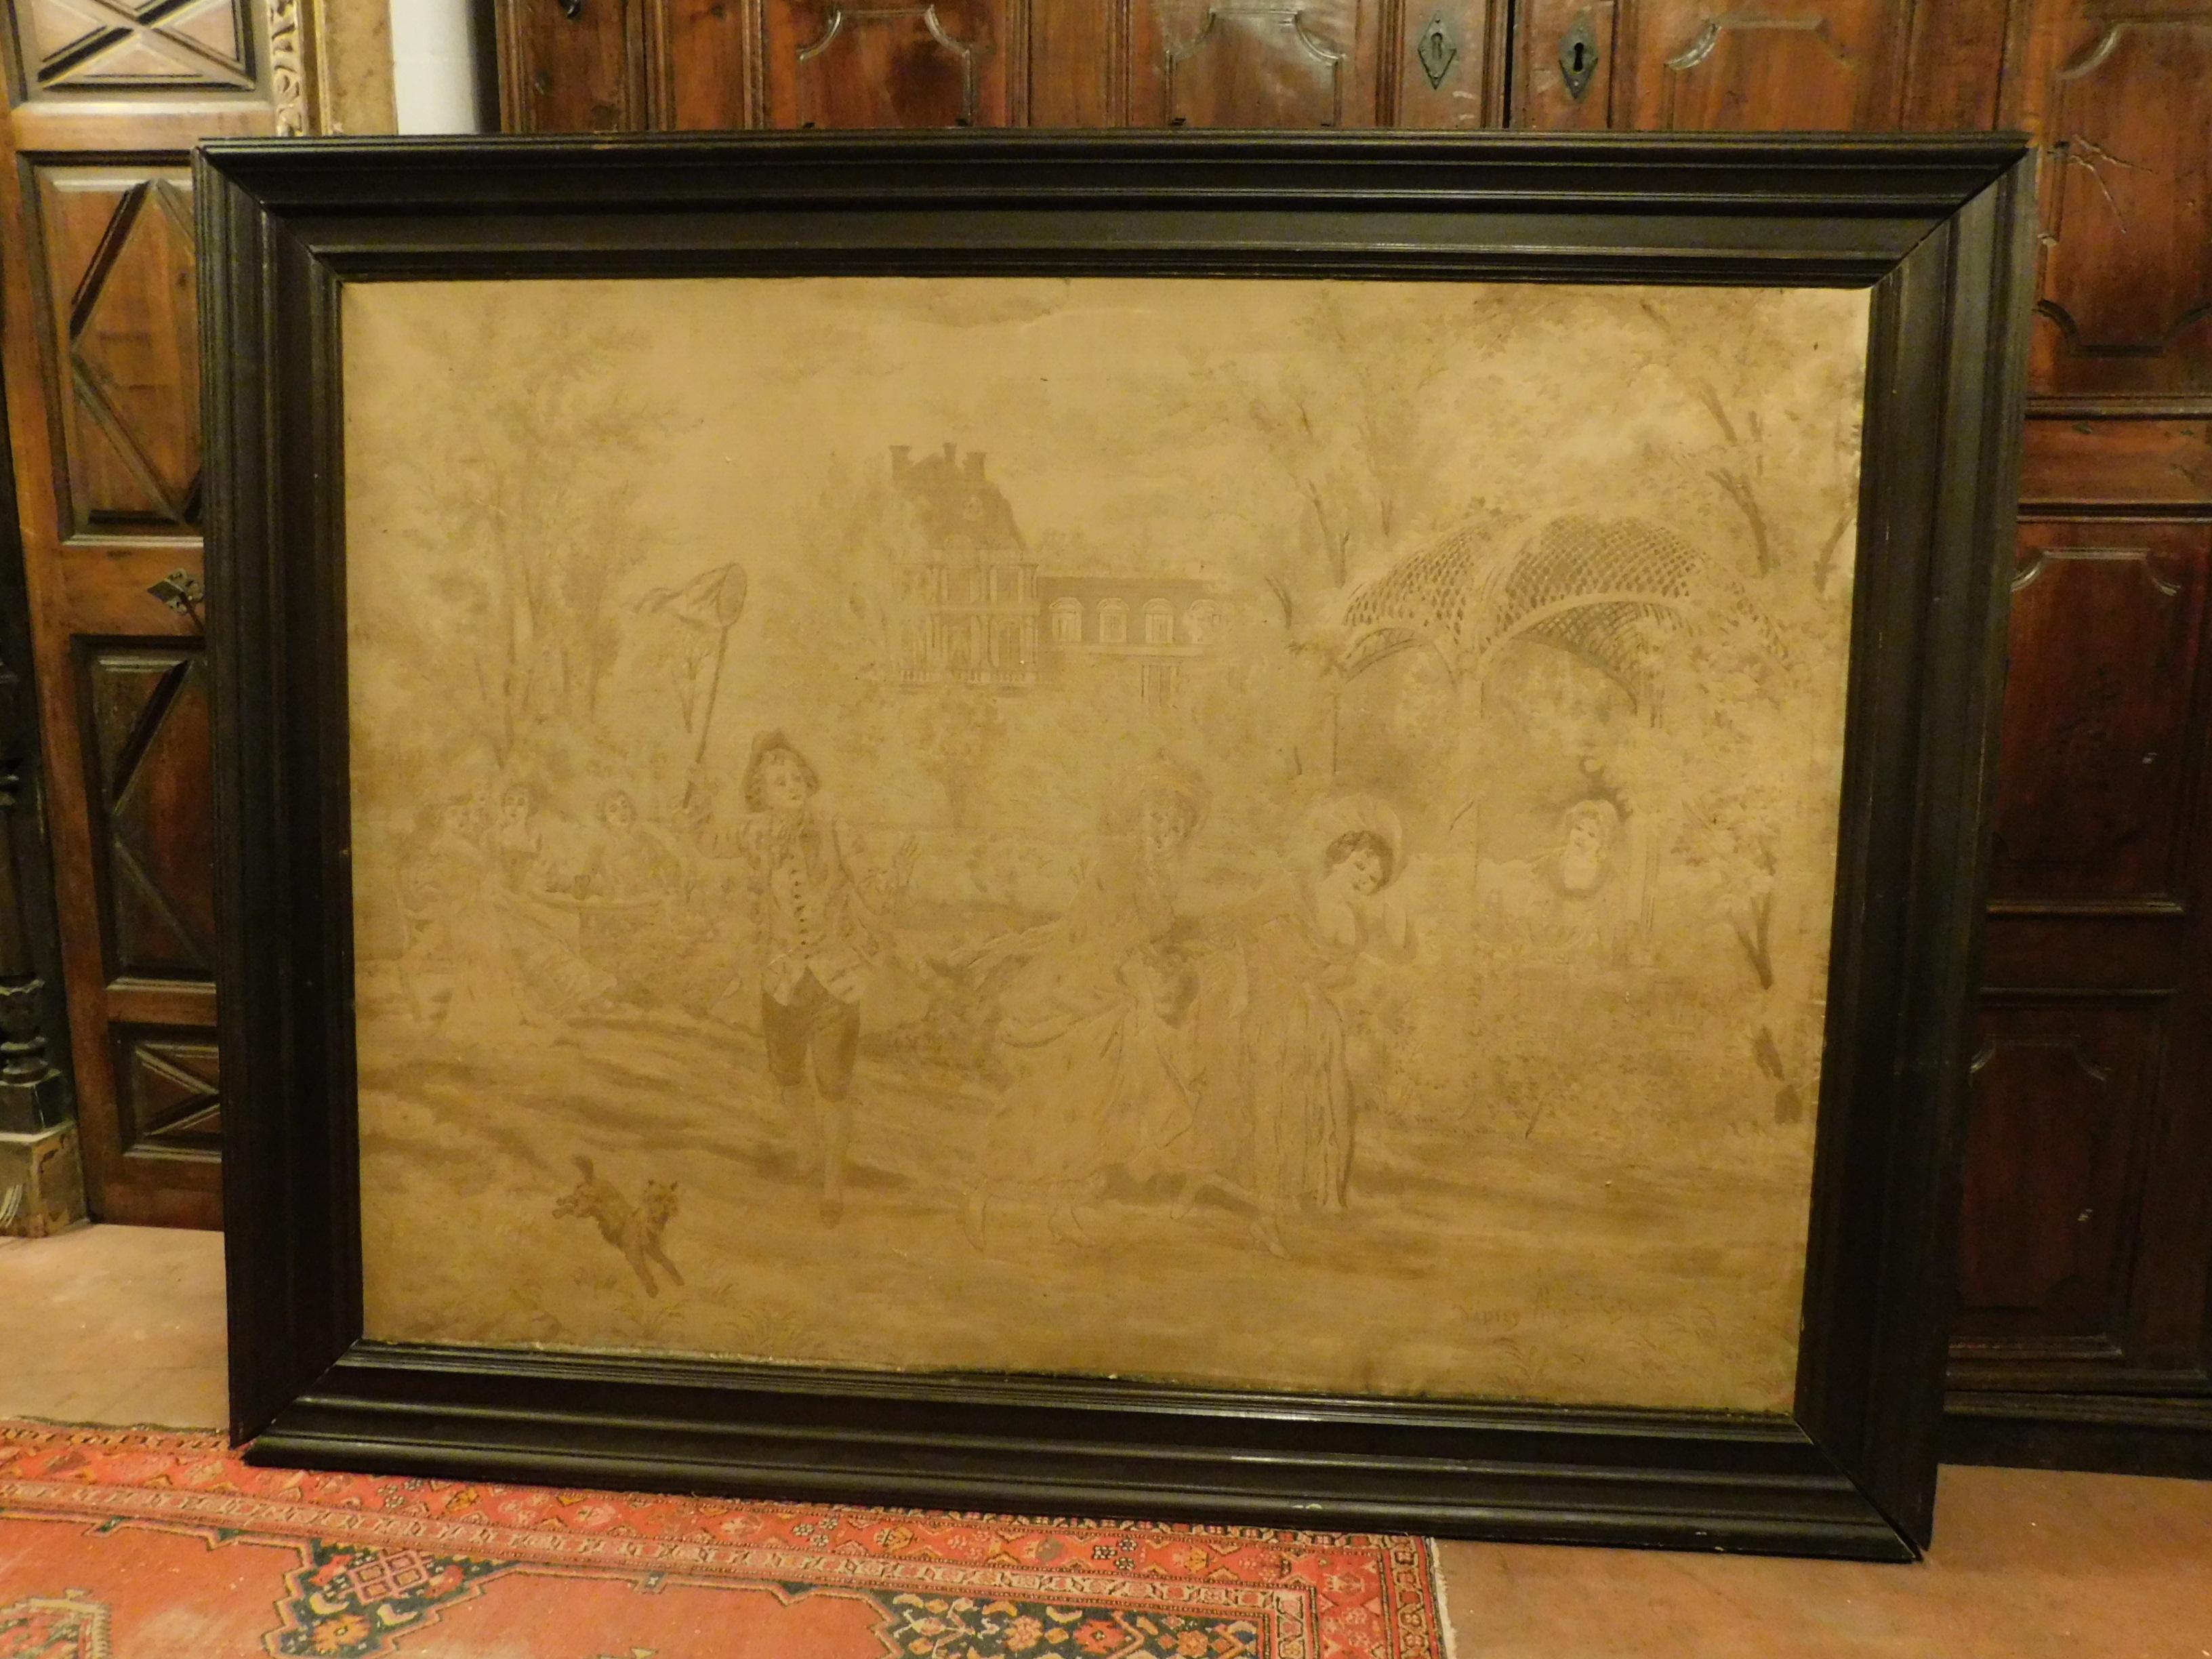 Antique tapestry by D'Apres Alonso Perez, with yellow and beige tones, with a brown wooden frame that will be shipped disassembled with respect to the canvas. D.A.Perez was a European painter (1881-1914) who participated in the 1901 Paris salon. The